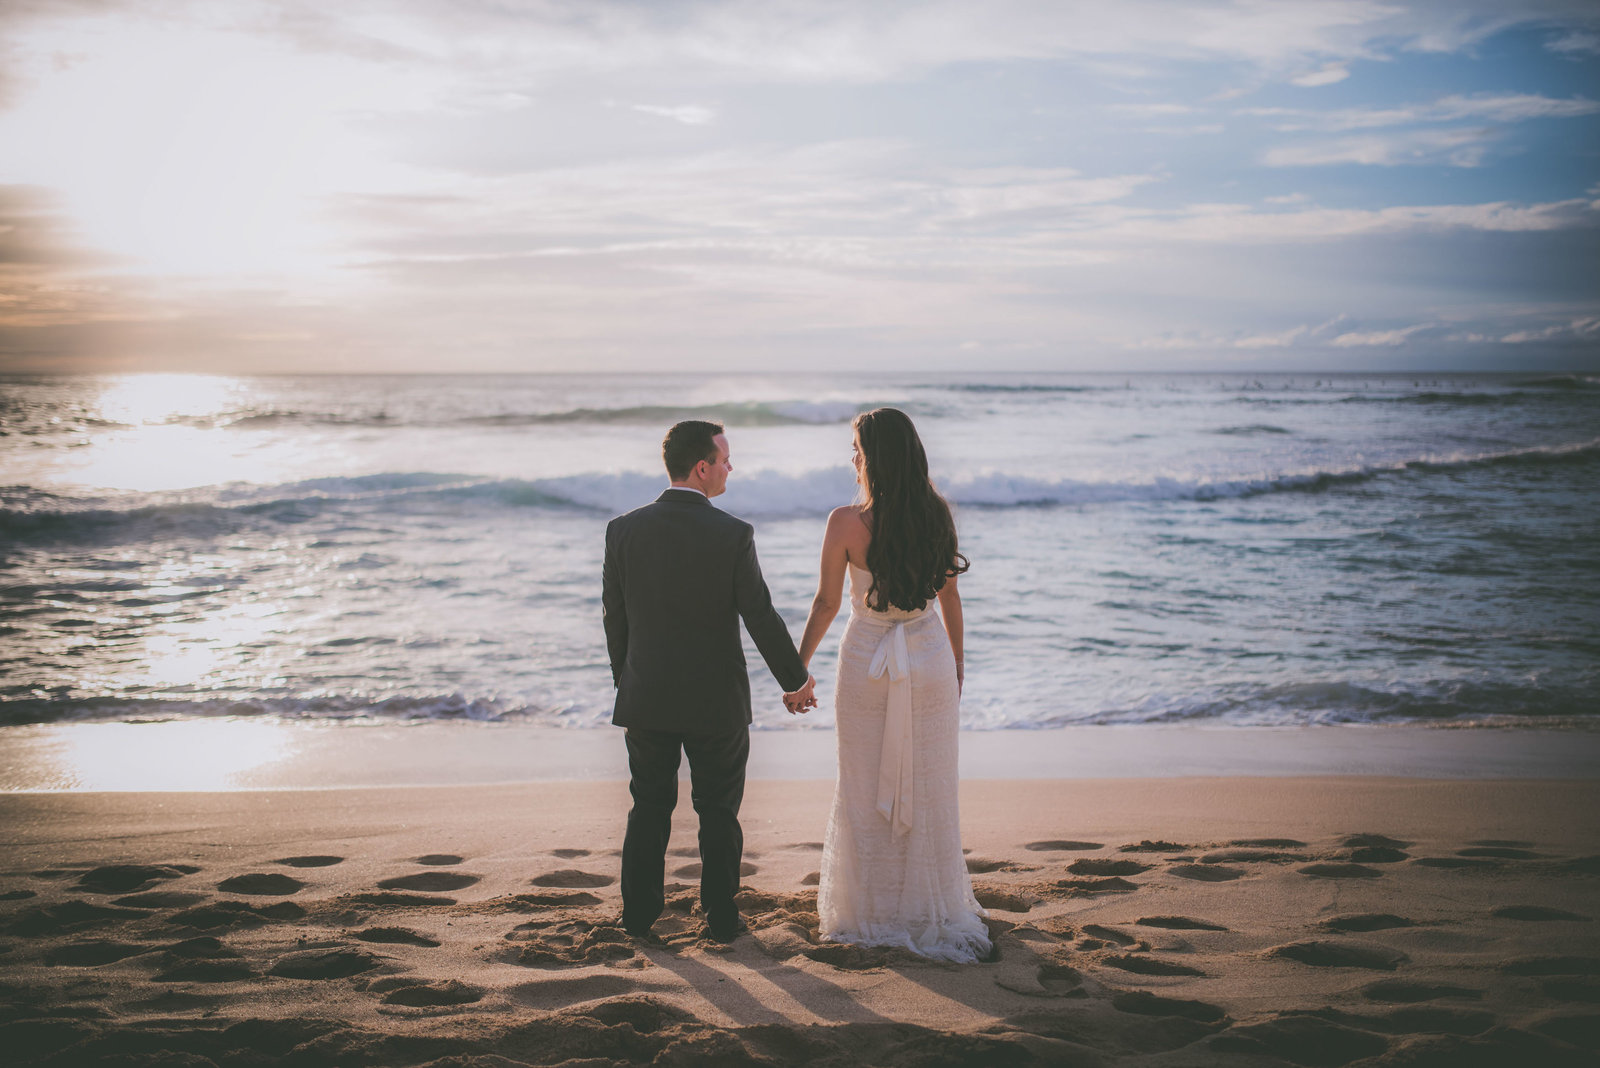 Oahu couple holds hands on beach during sunset.